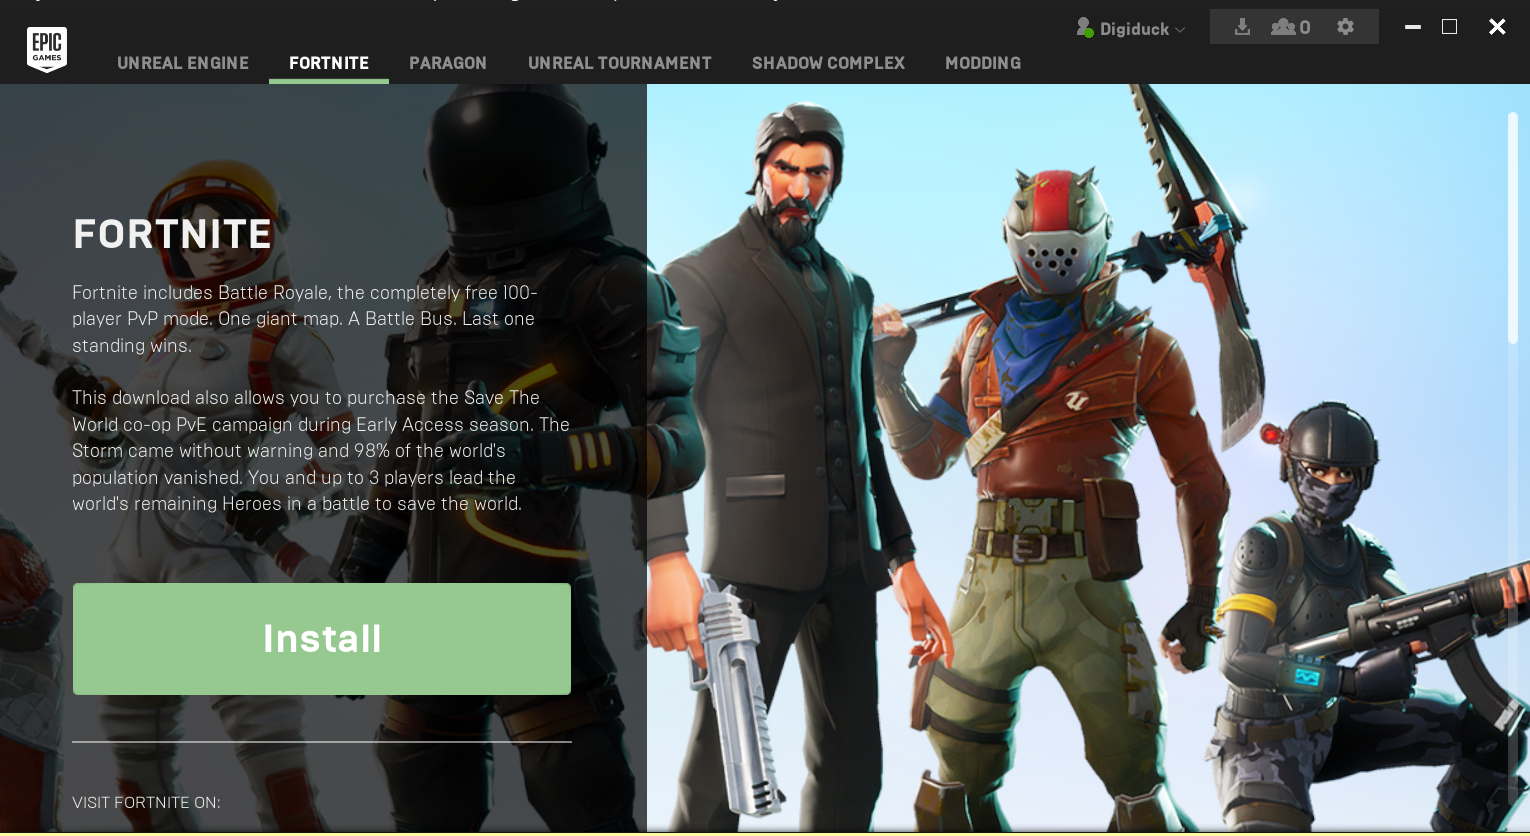 Wait, if Epic Games Launcher came out late 2018, how did you get